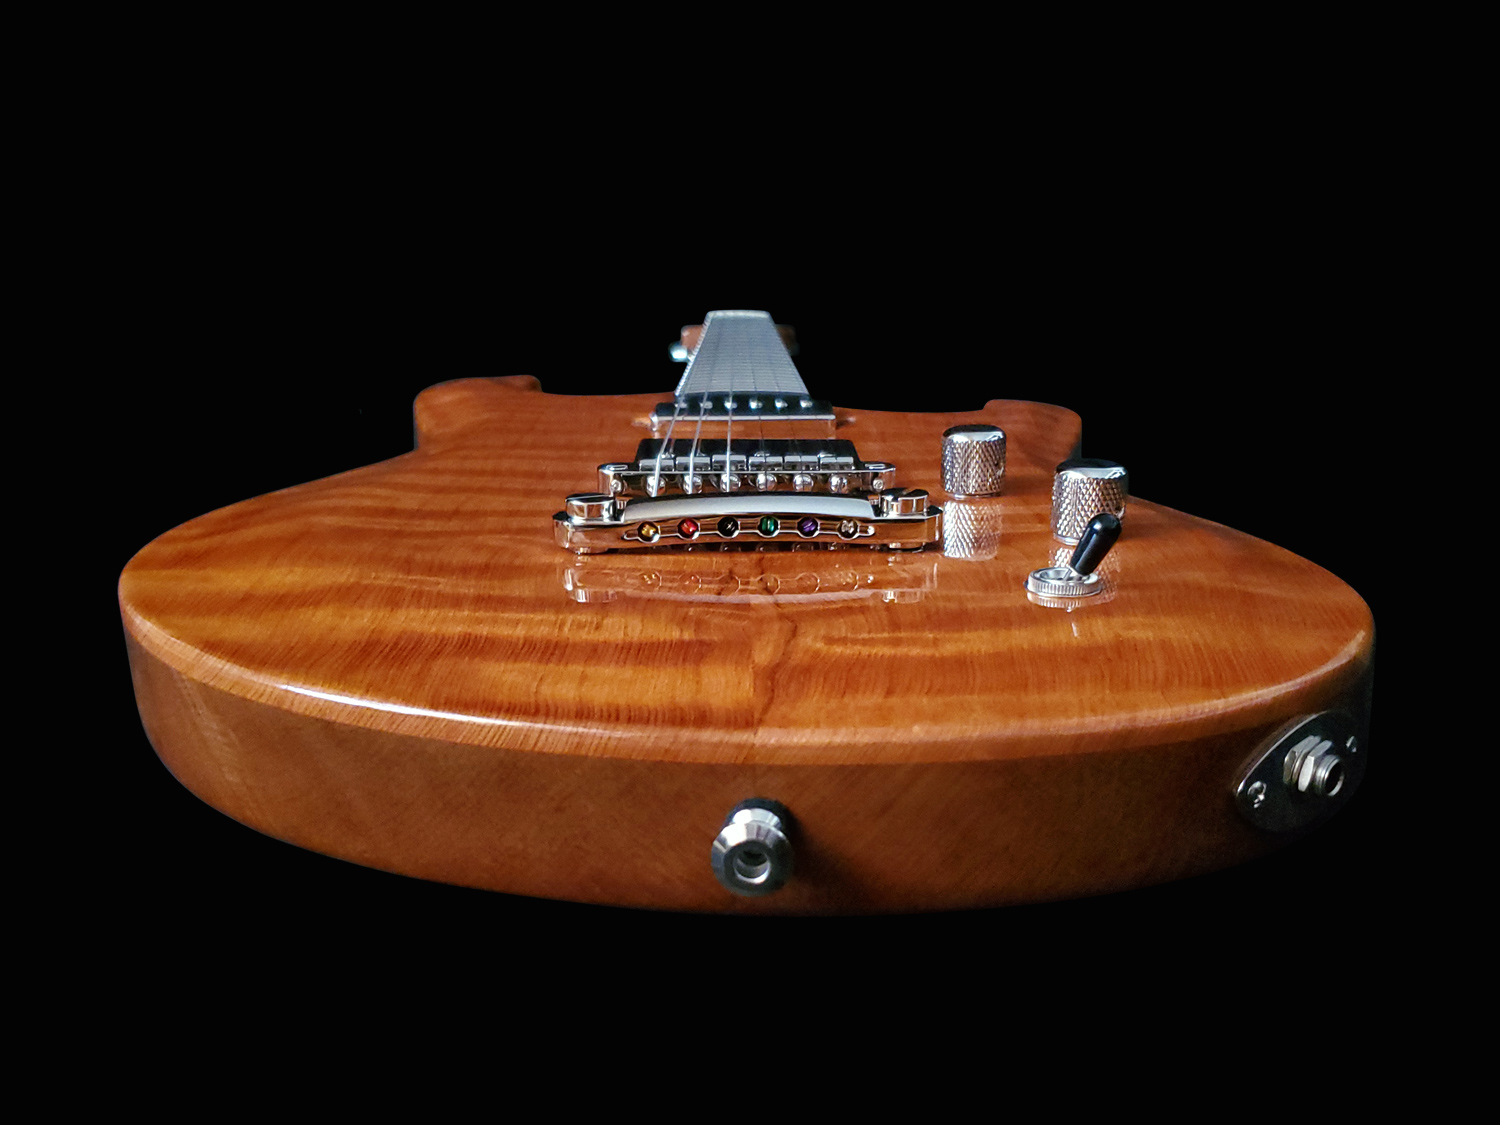 MG Carve Guitar - Product Design and Engineering